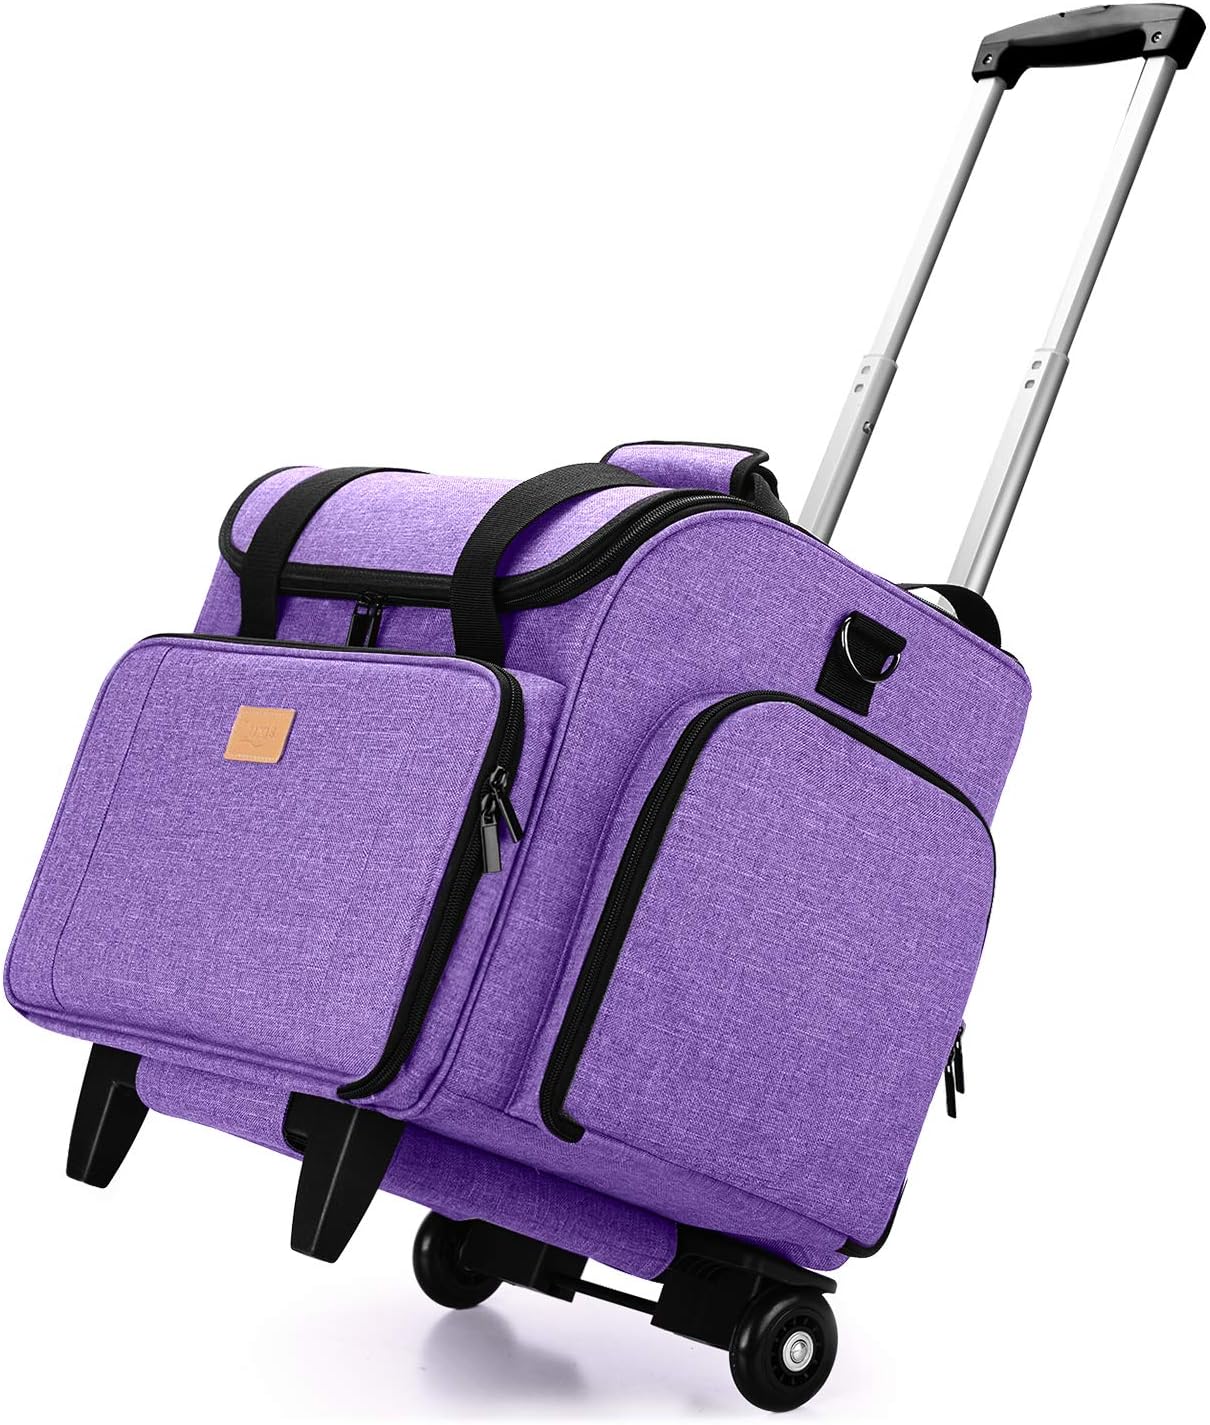 LUXJA Serger Case with Detachable Trolley Dolly, Serger Bag with Removable Padding Pad (Fit for Most Standard Serger Machines), Purple